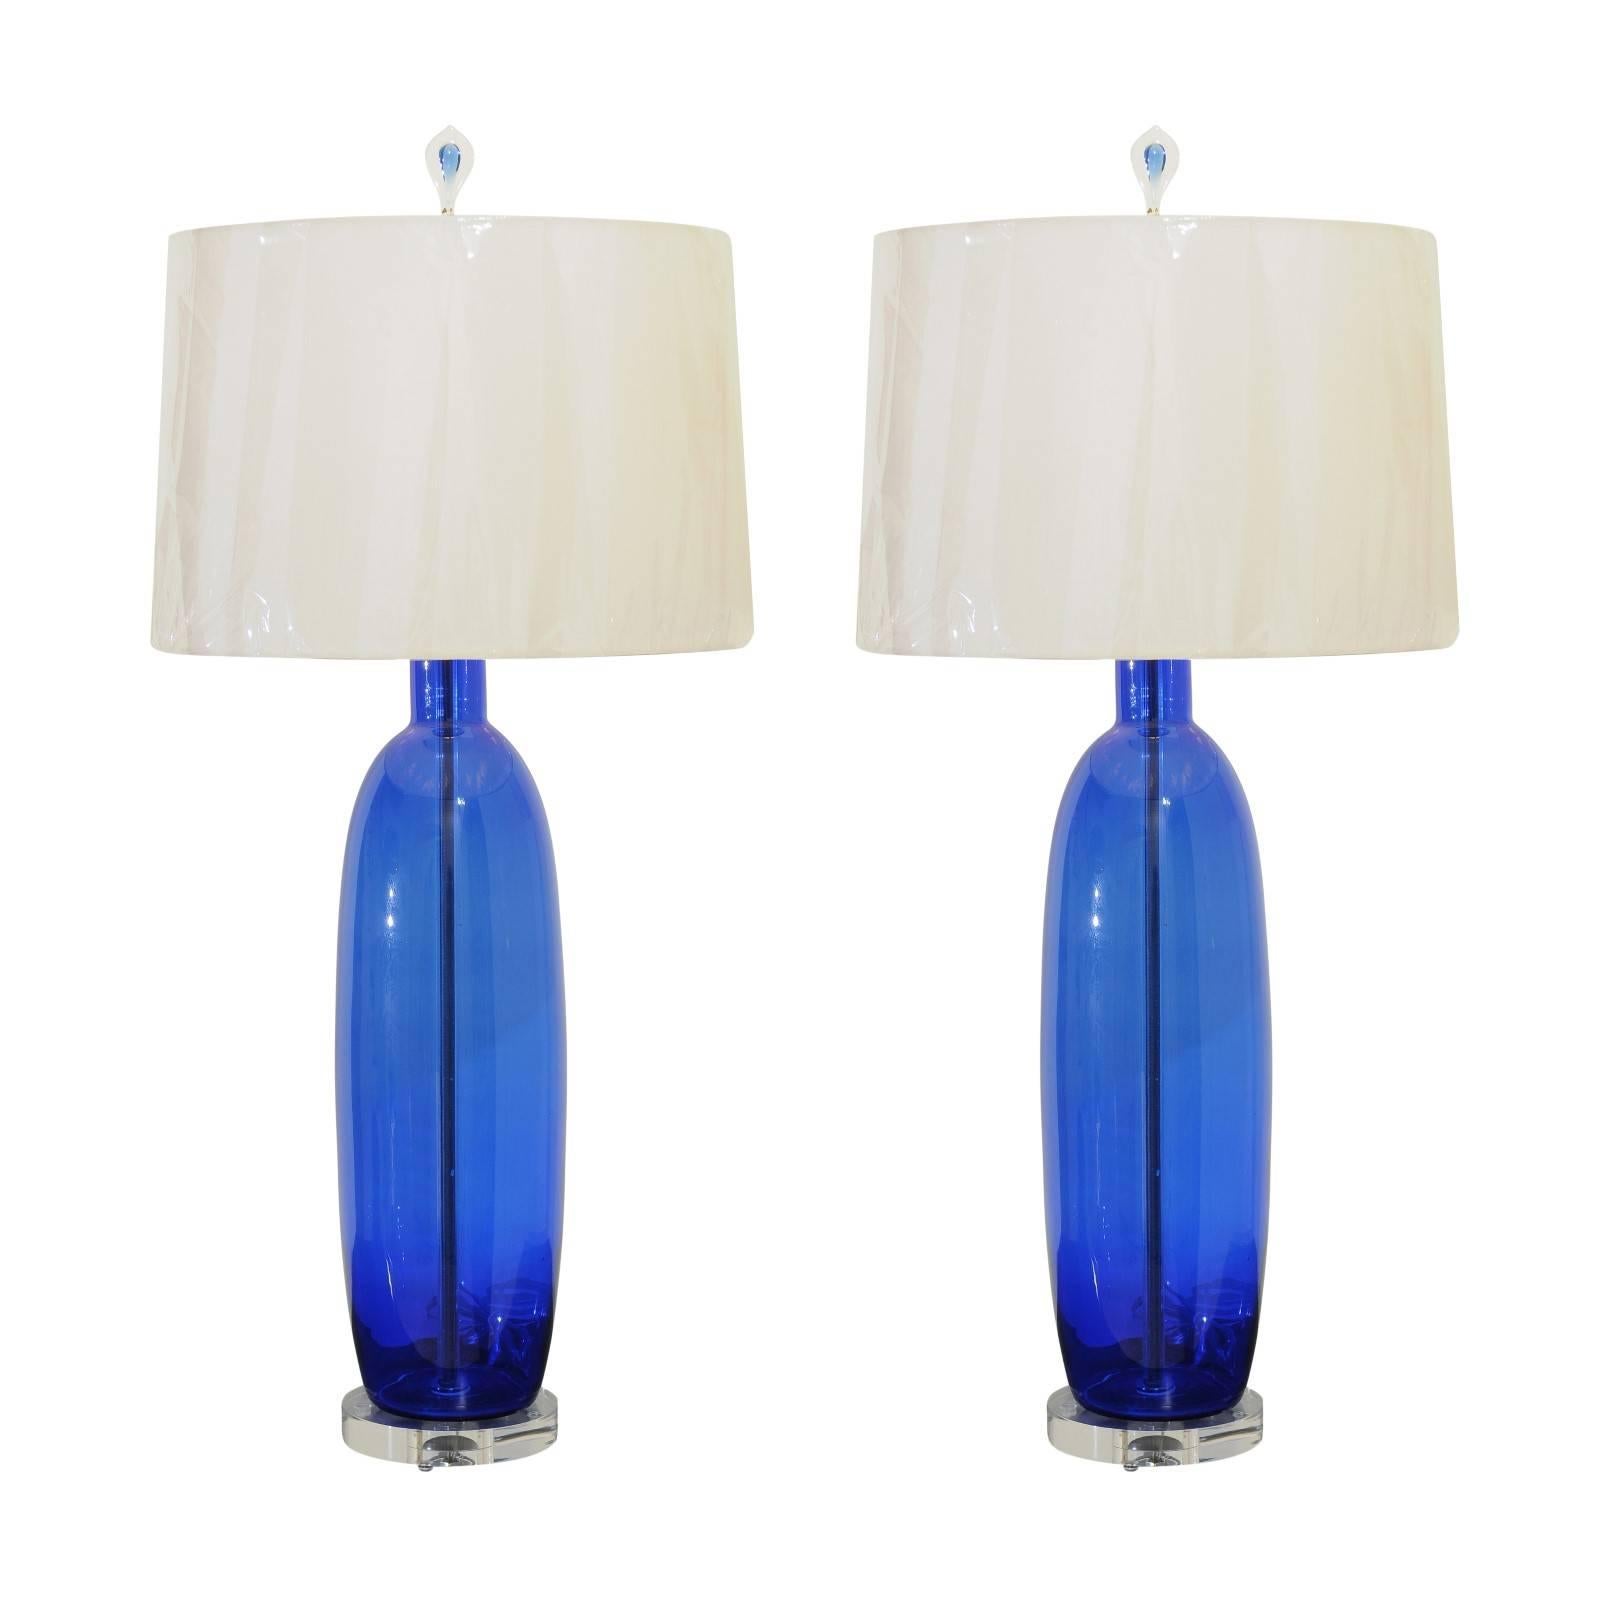 Fantastic Restored Pair of Large-Scale Blown Glass Lamps in Cobalt, circa 1970